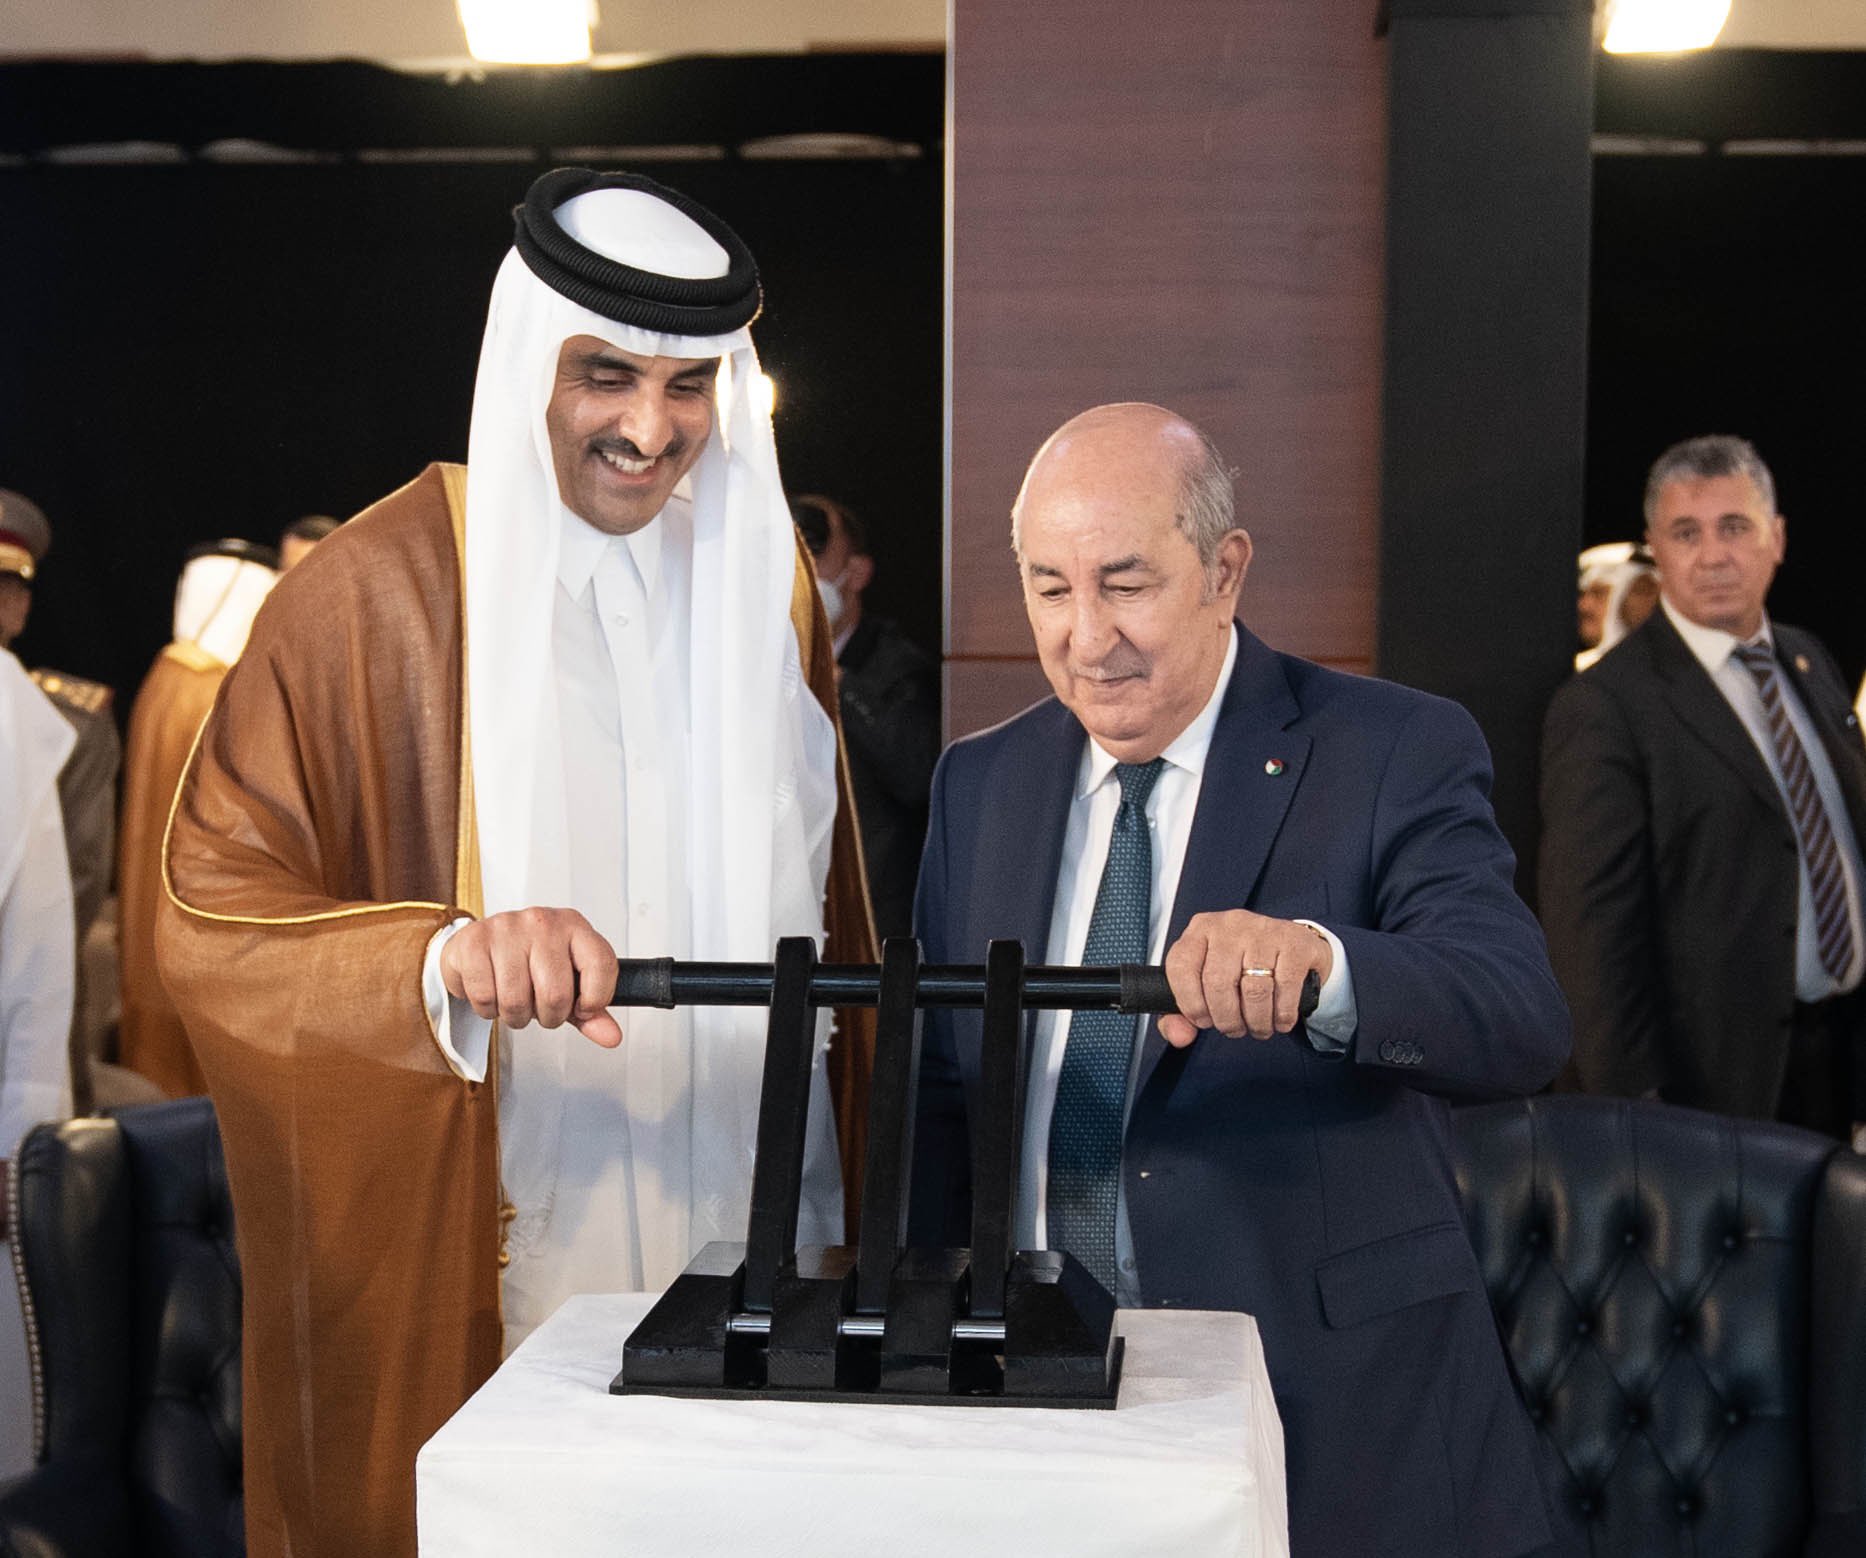 HH the Amir, Algerian President Attend Launch and Inauguration of Joint Projects